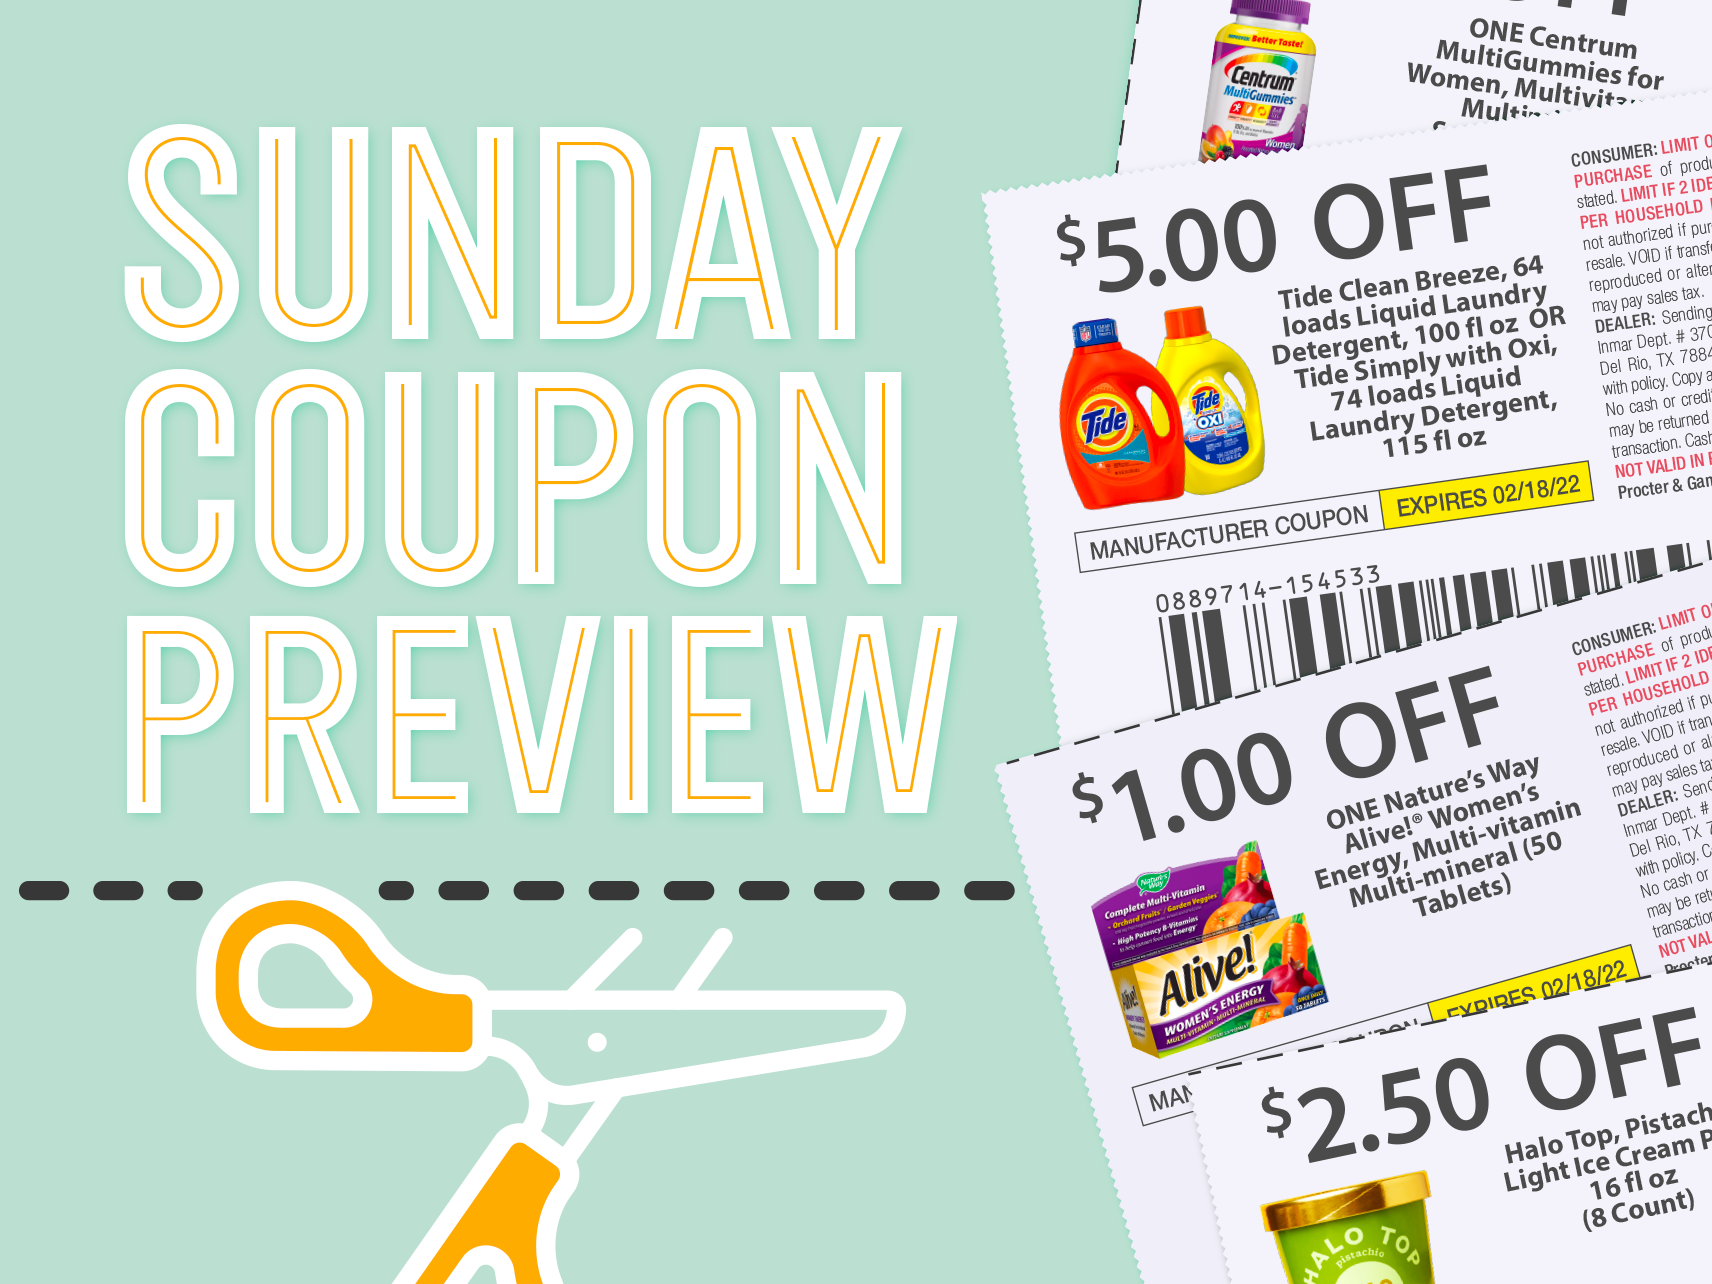 Sunday Coupon Preview For 6/26 – THREE Inserts